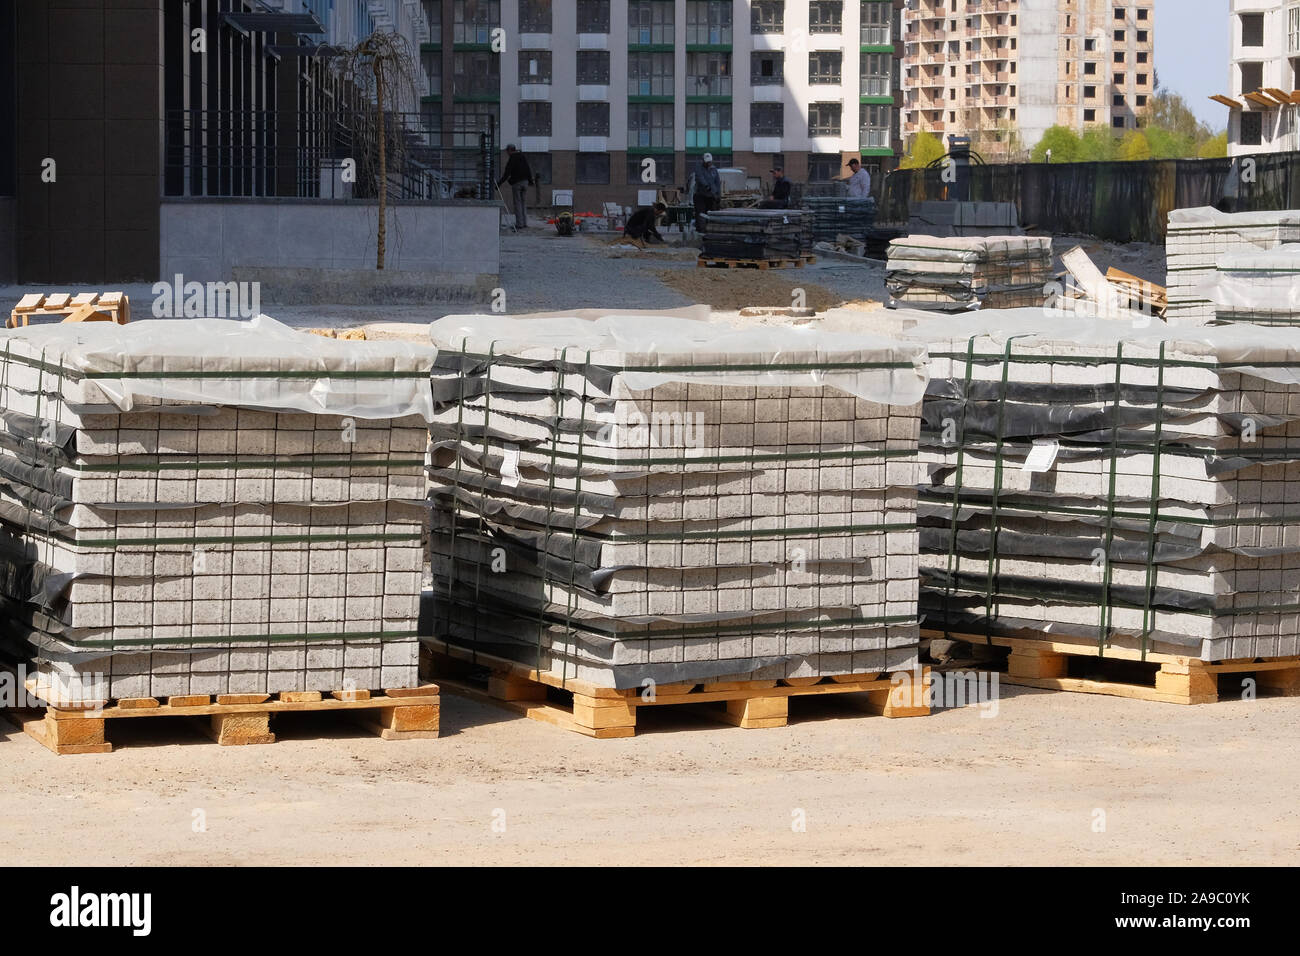 Construction Materials. Building materials for construction of residential complex. Pile of gray bricks at construction site. Stock Photo